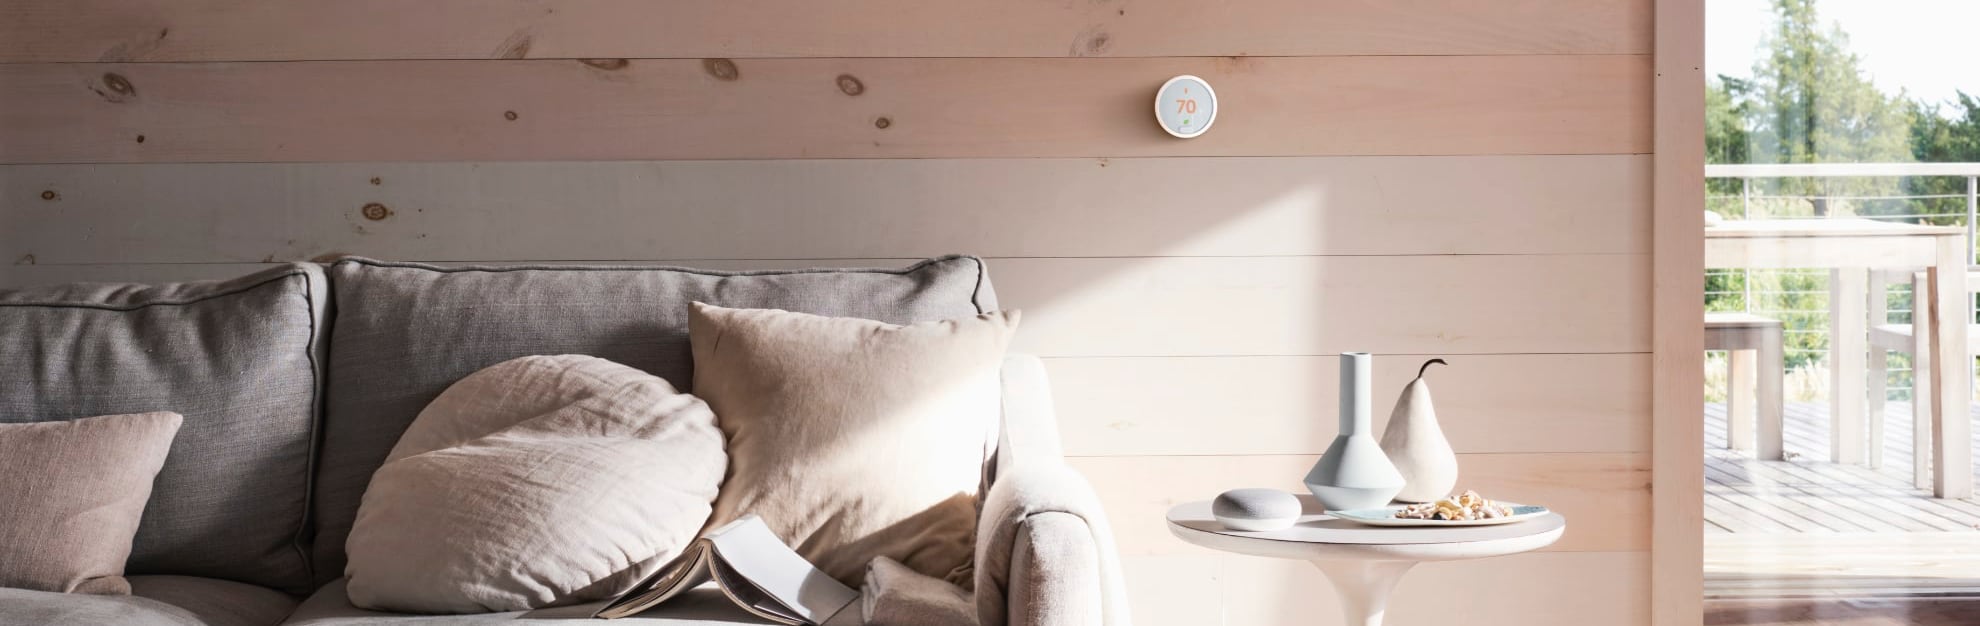 Vivint Home Automation in Greenville